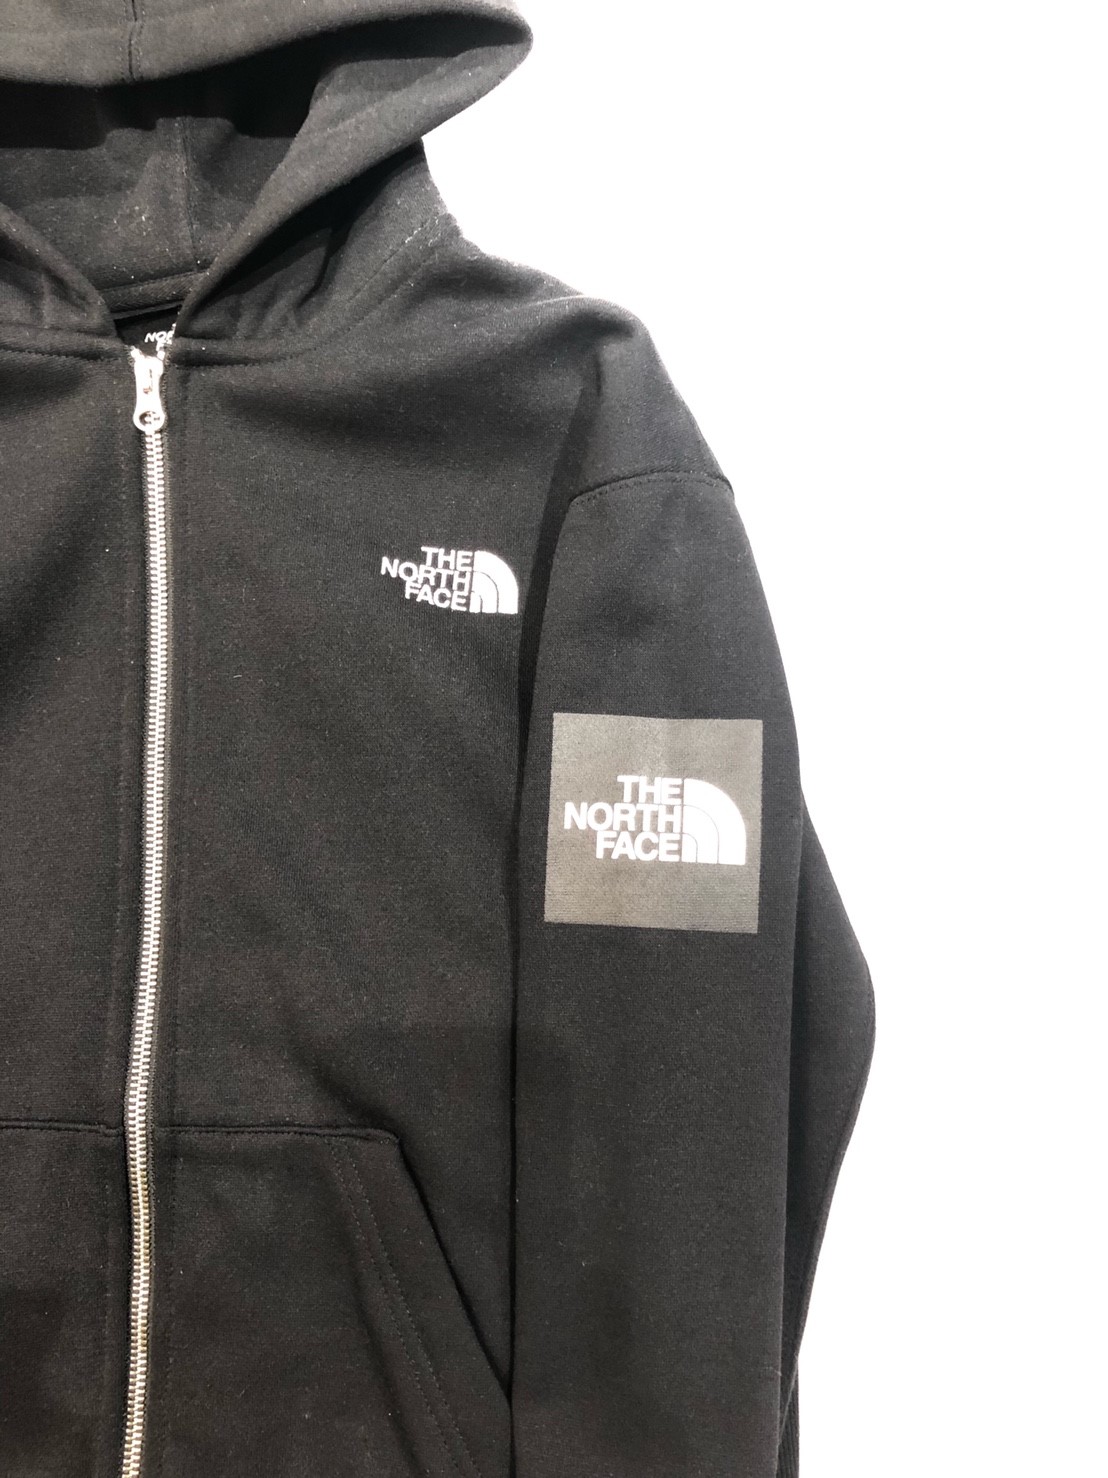 THE NORTH FACE﻿